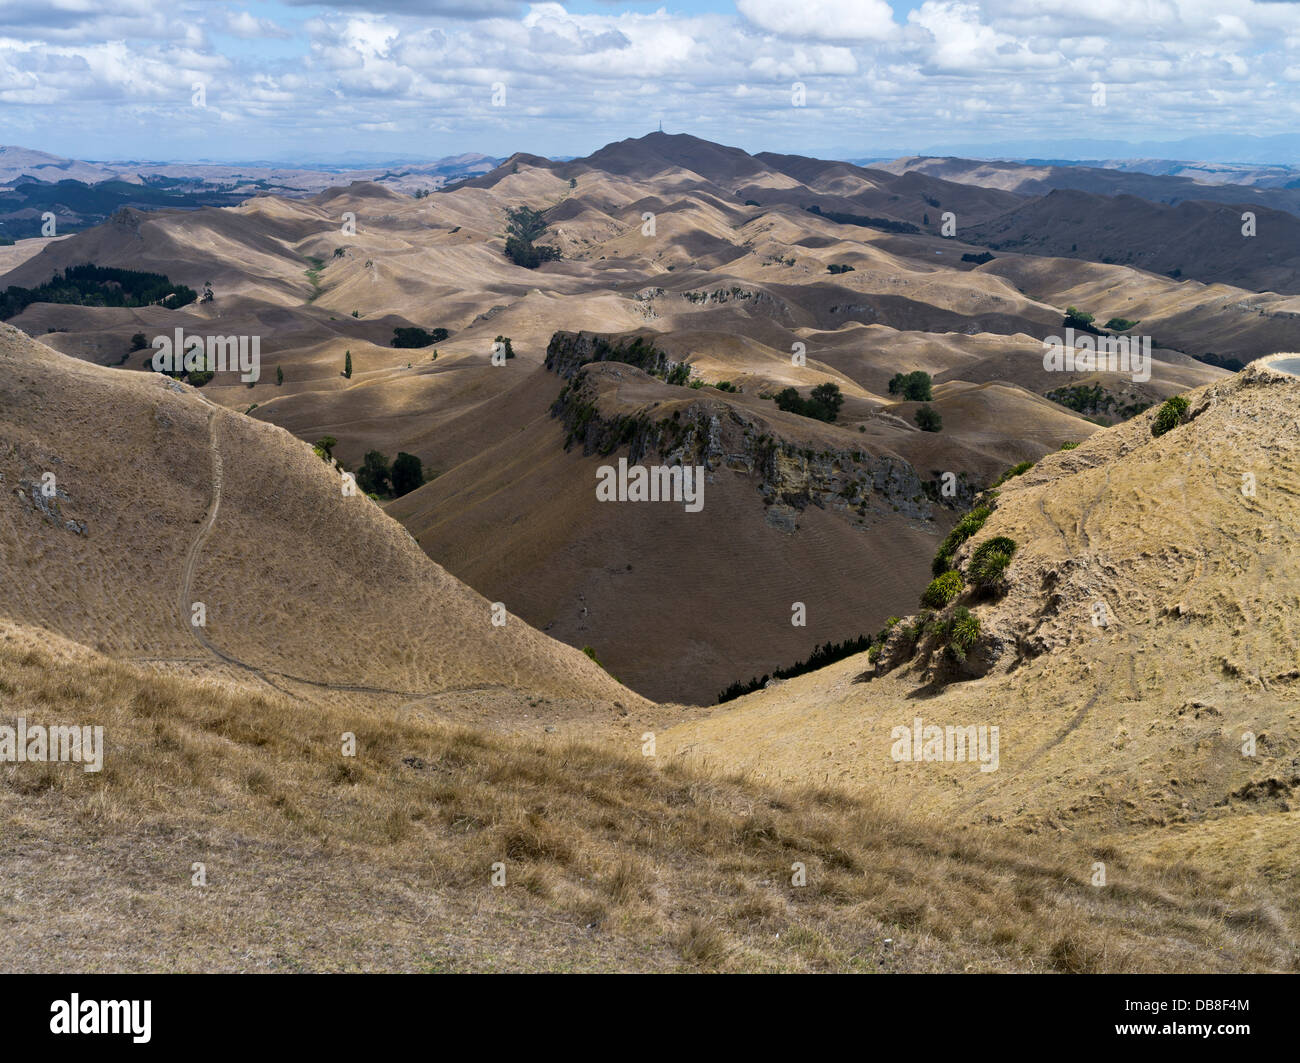 dh Te Mata Peak HAWKES BAY NEW ZEALAND View of dry summer countryside from viewpoint hillside nz country island landscape havelock north landscapes Stock Photo